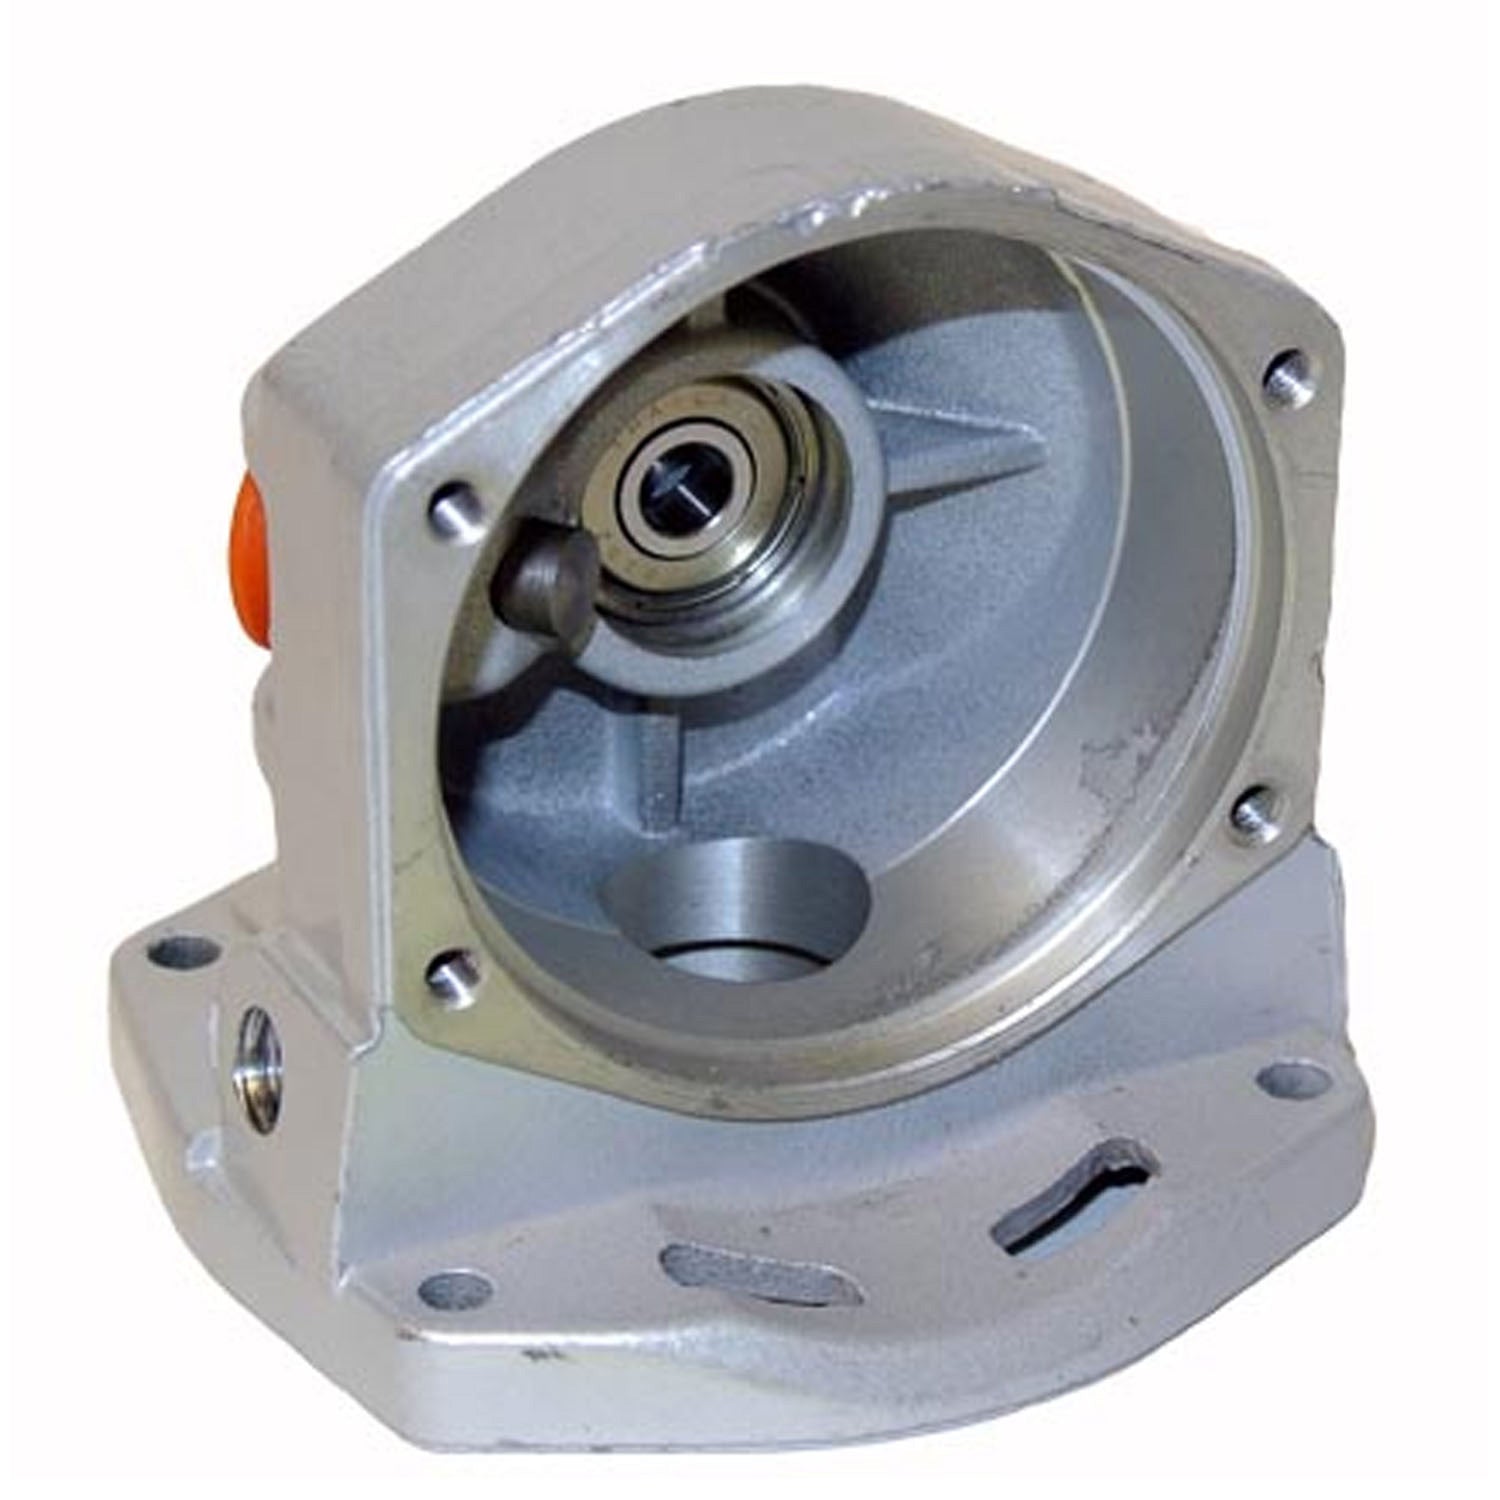 rupes-gear-box-with-spindle-lock